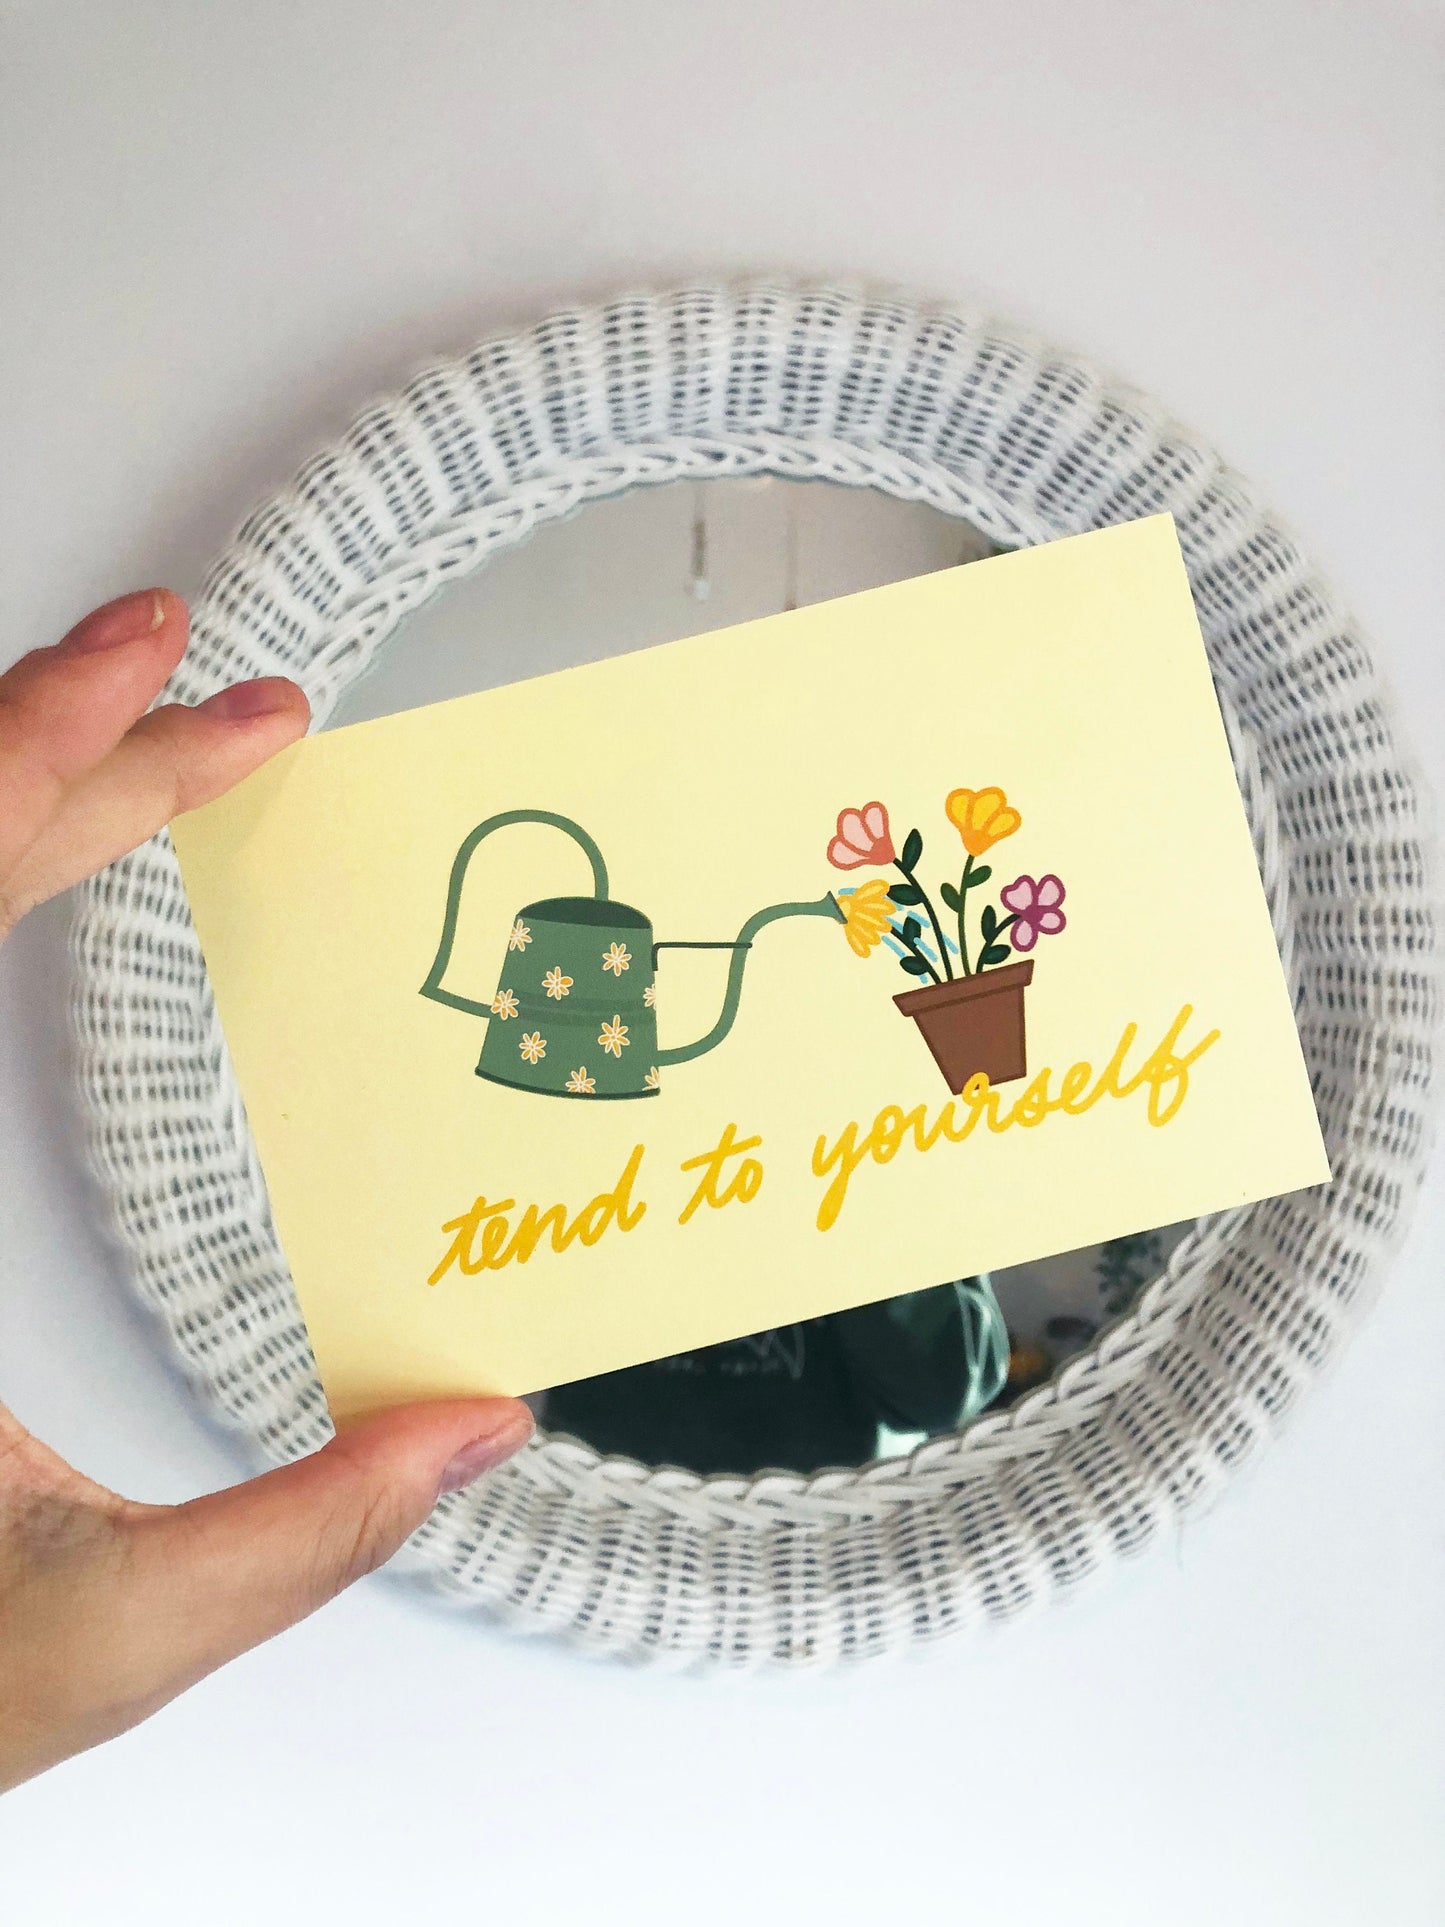 Tend To Yourself - Floral Art Print, Watering Can Art Print